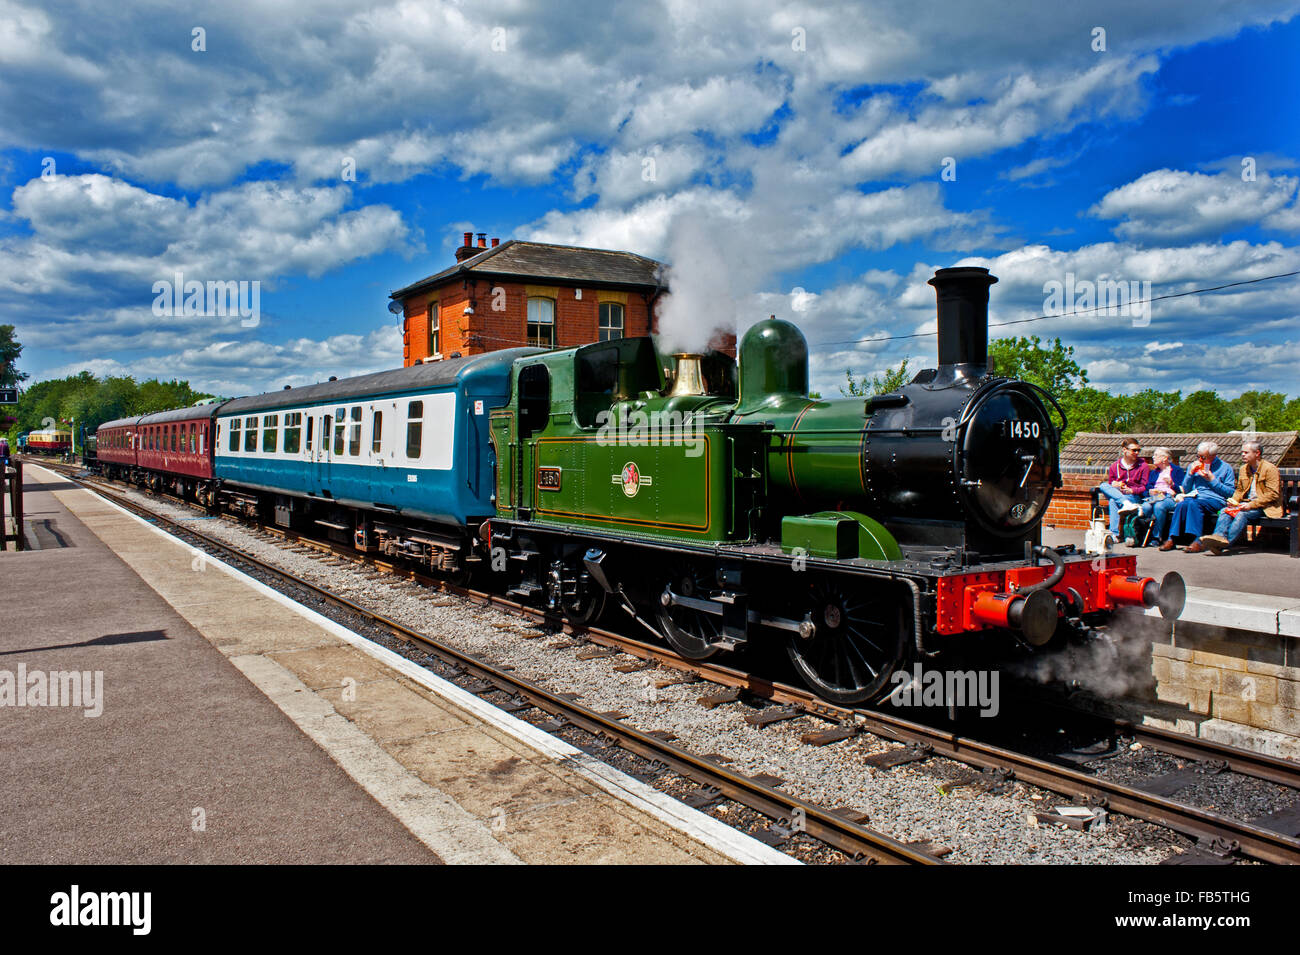 14xx Class No 1450 at North Weald station on the Epping Ongar Railway Stock Photo